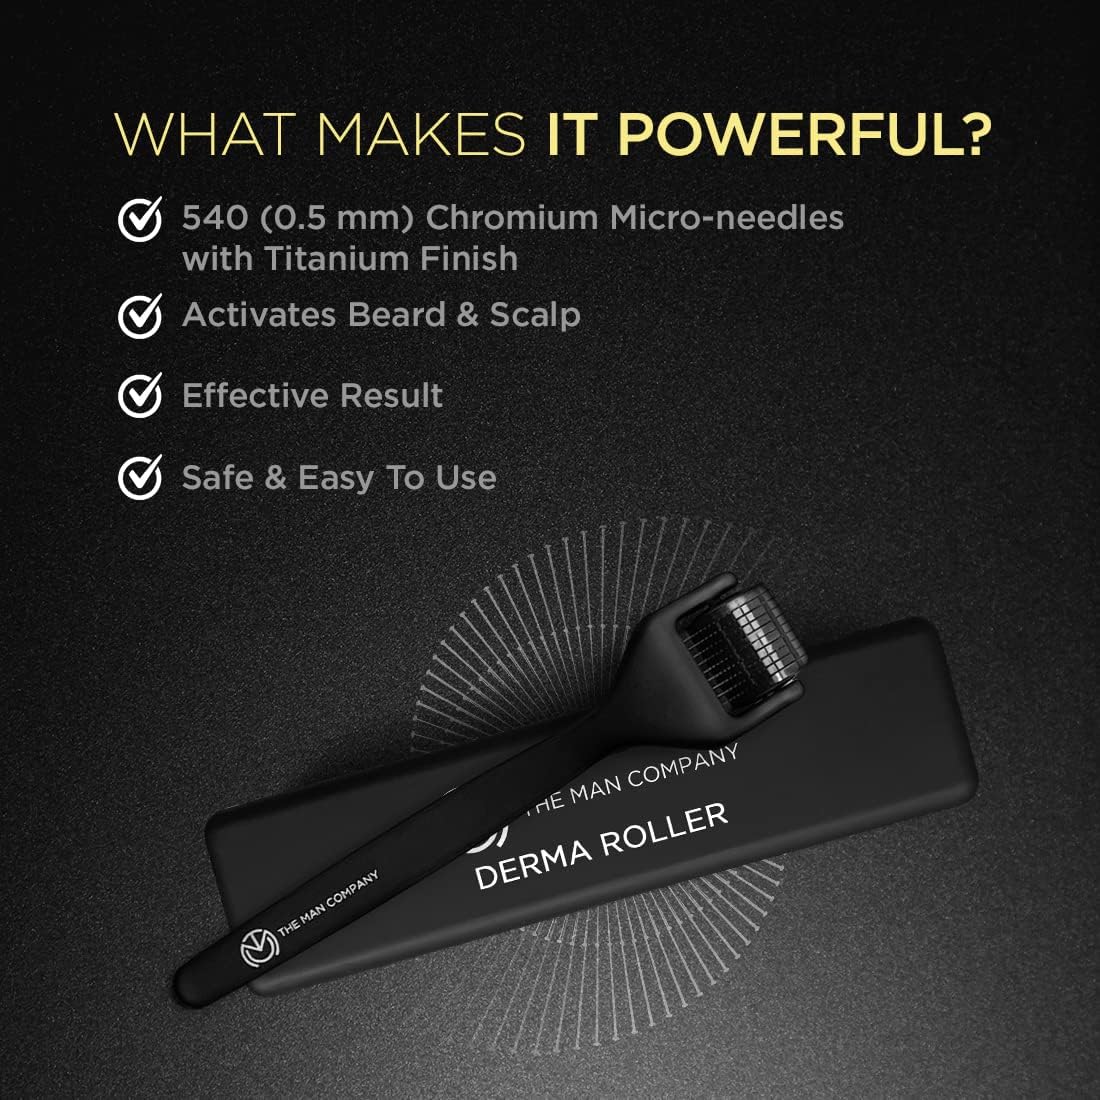 The Man Company Derma Roller for Men | For Scalp & Beard | Activates Hair Follicles | 540 (0.5 mm) Chromium micro-needles with Titanium Finish | Safe & Effective | Easy To Use